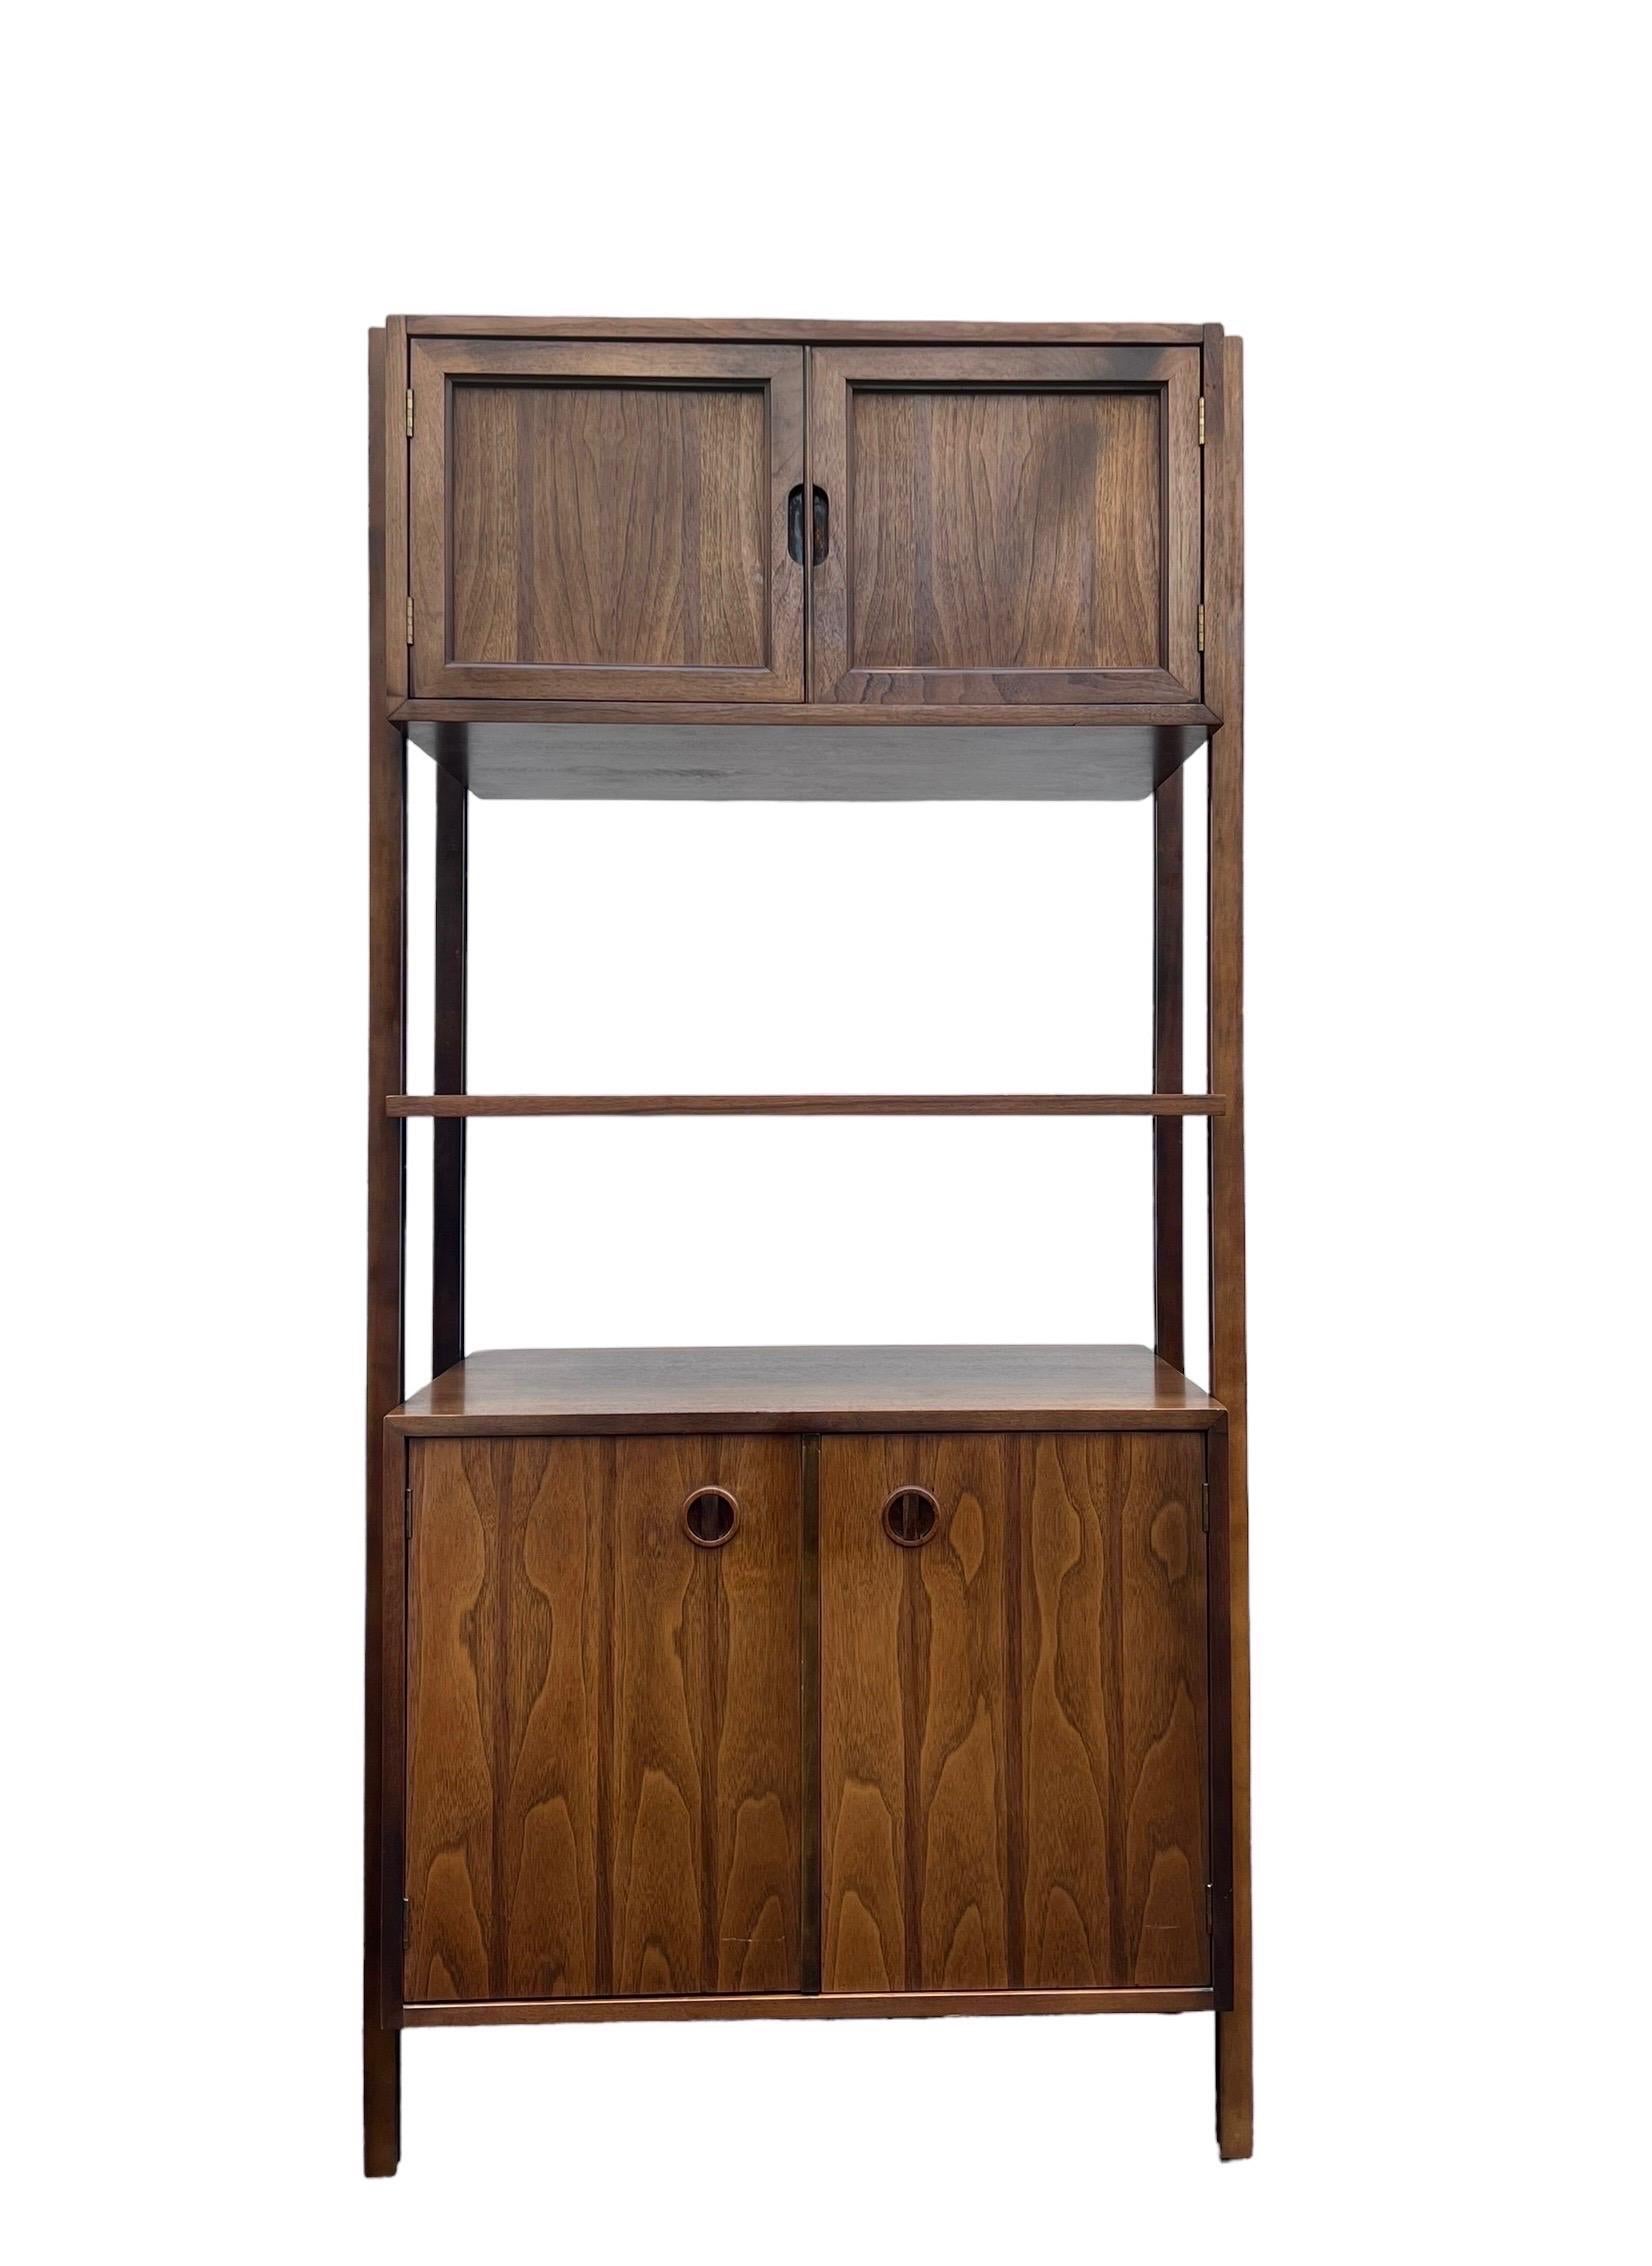 Rare 1-bay freestanding walnut wall unit by Stanley. This set is rare in its original form with cabinets and shelf. The bottom cabinet has a removable shelf. The height-wise location of the cabinets and the shelf are adjustable. This unit can be